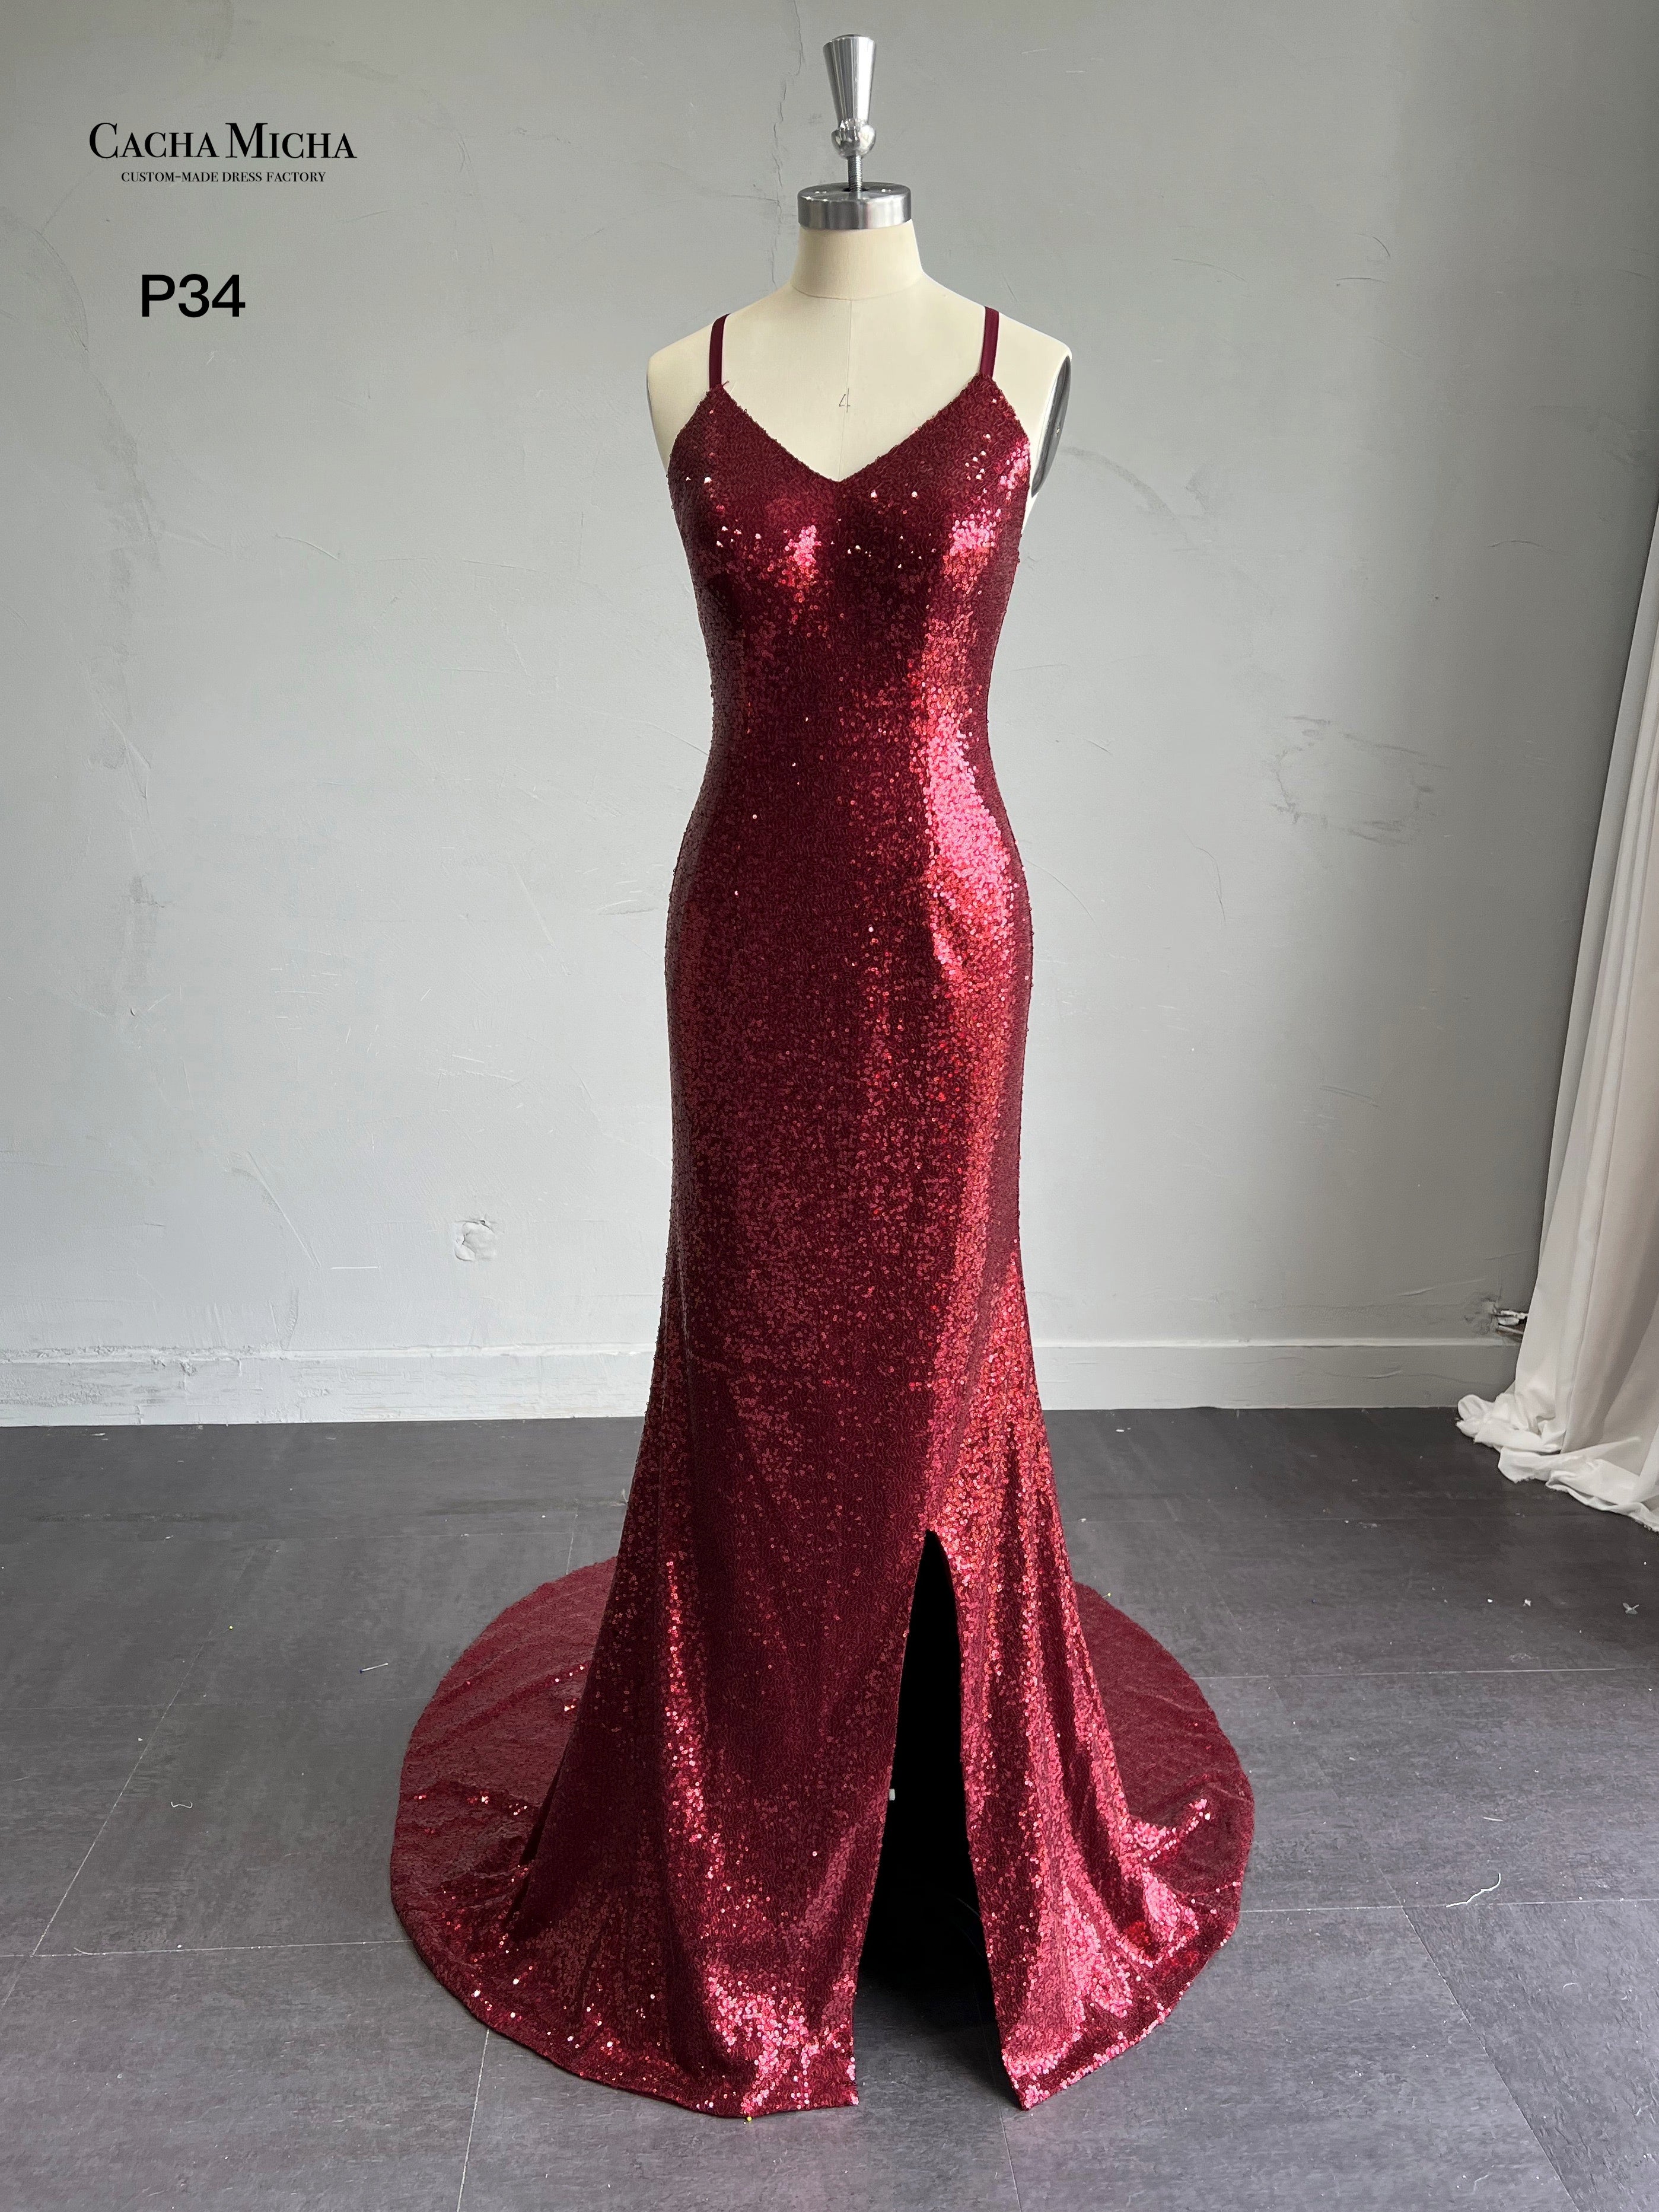 Sexy Backless Wine Red Sequin Mermaid Prom Dress P34